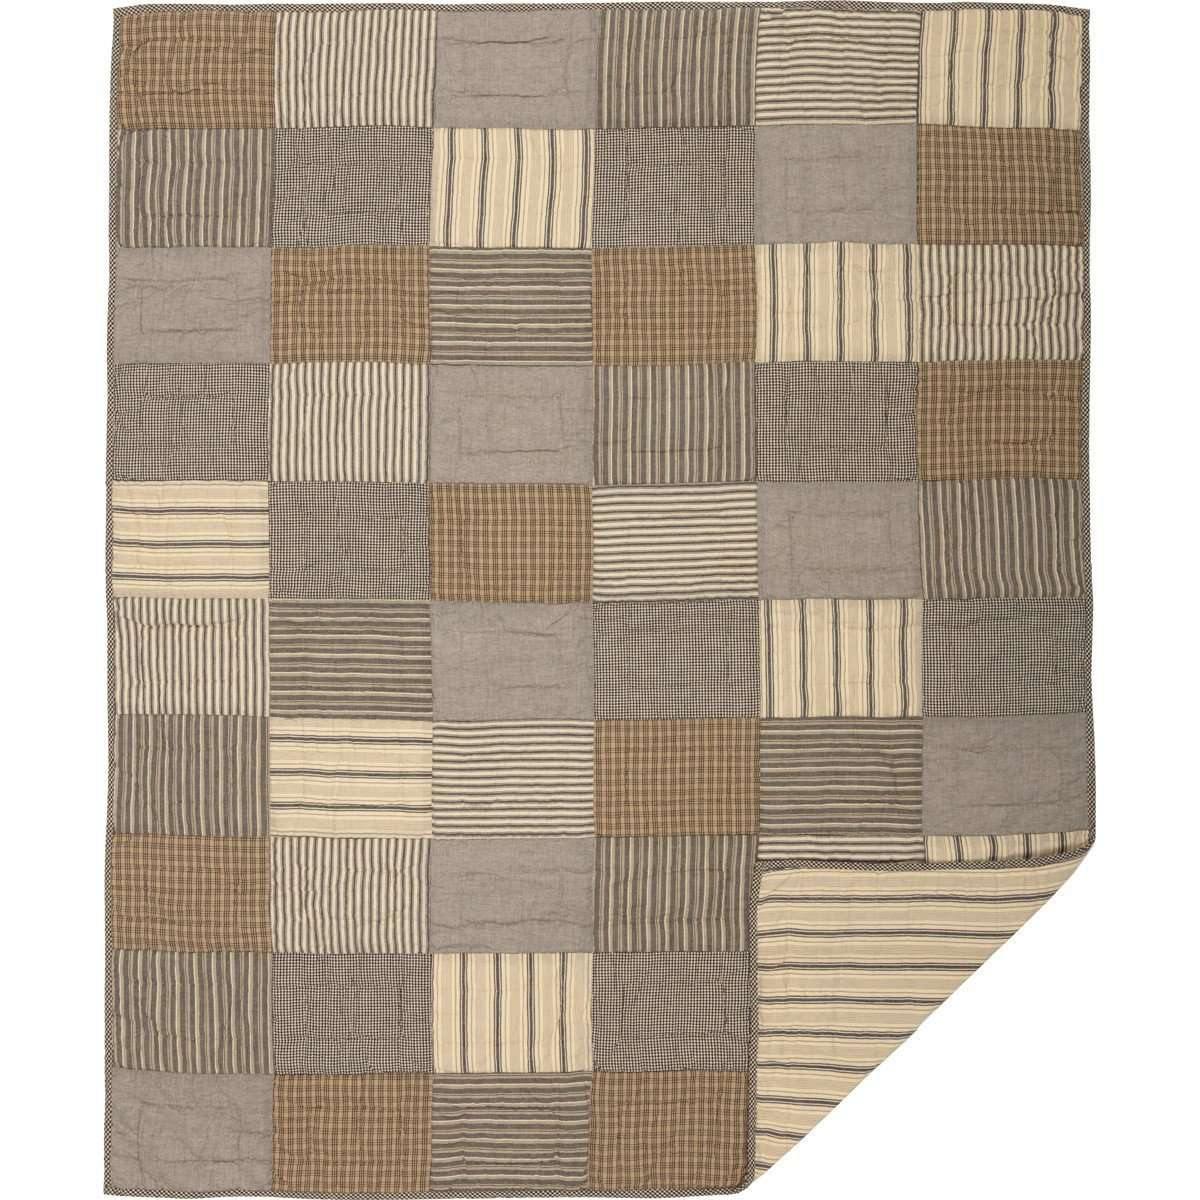 Sawyer Mill Charcoal Block Quilted Throw 60x50 VHC Brands full